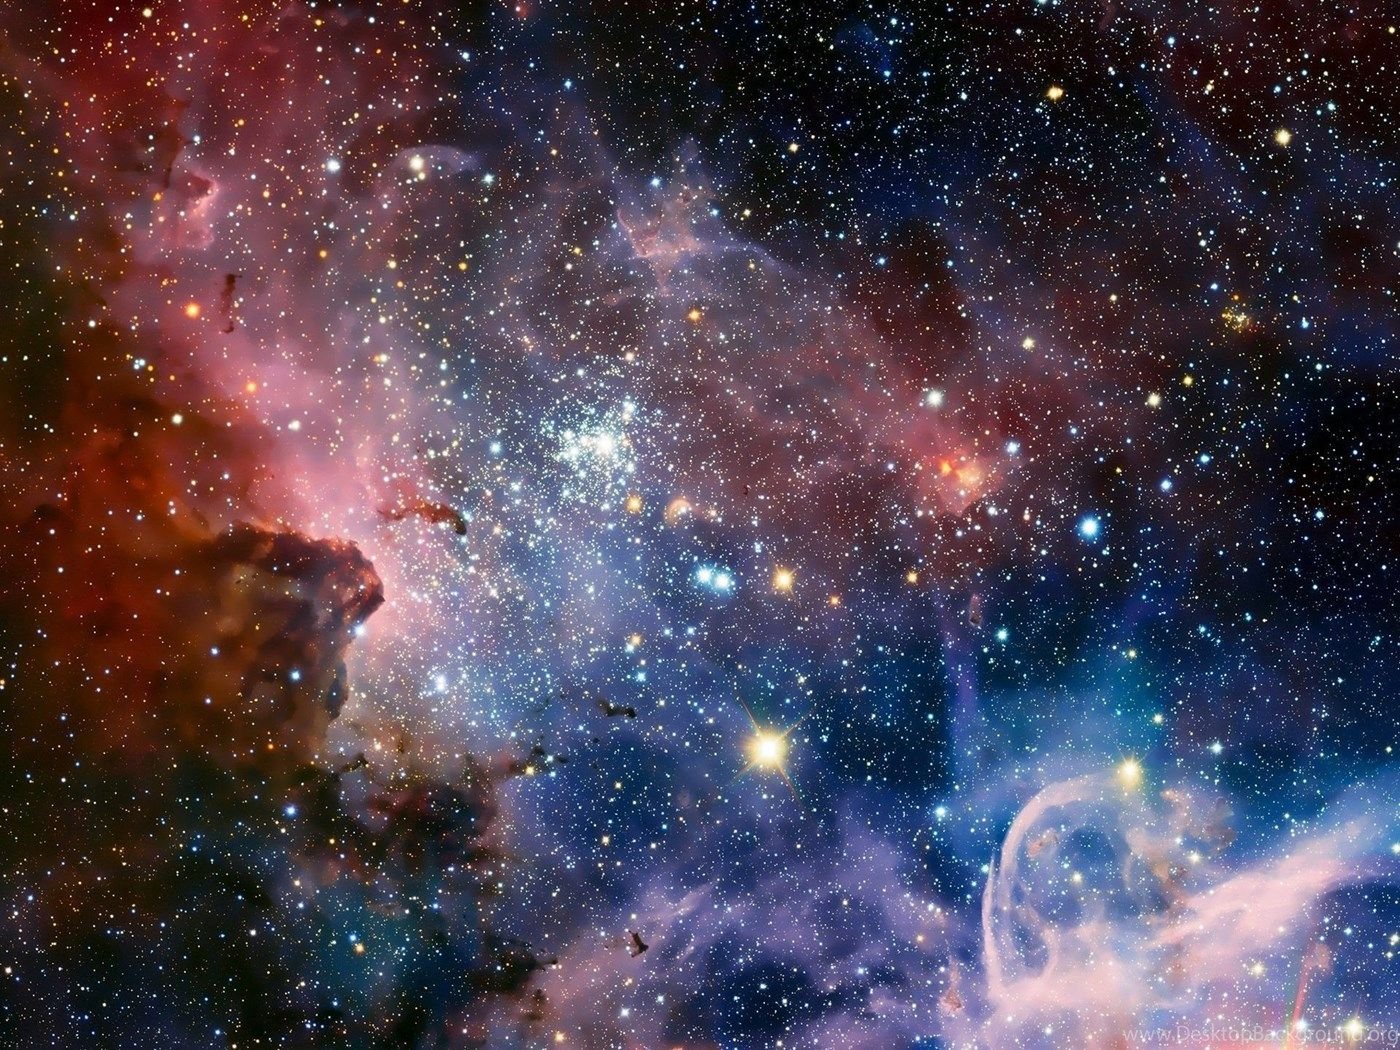 Live Space Wallpapers